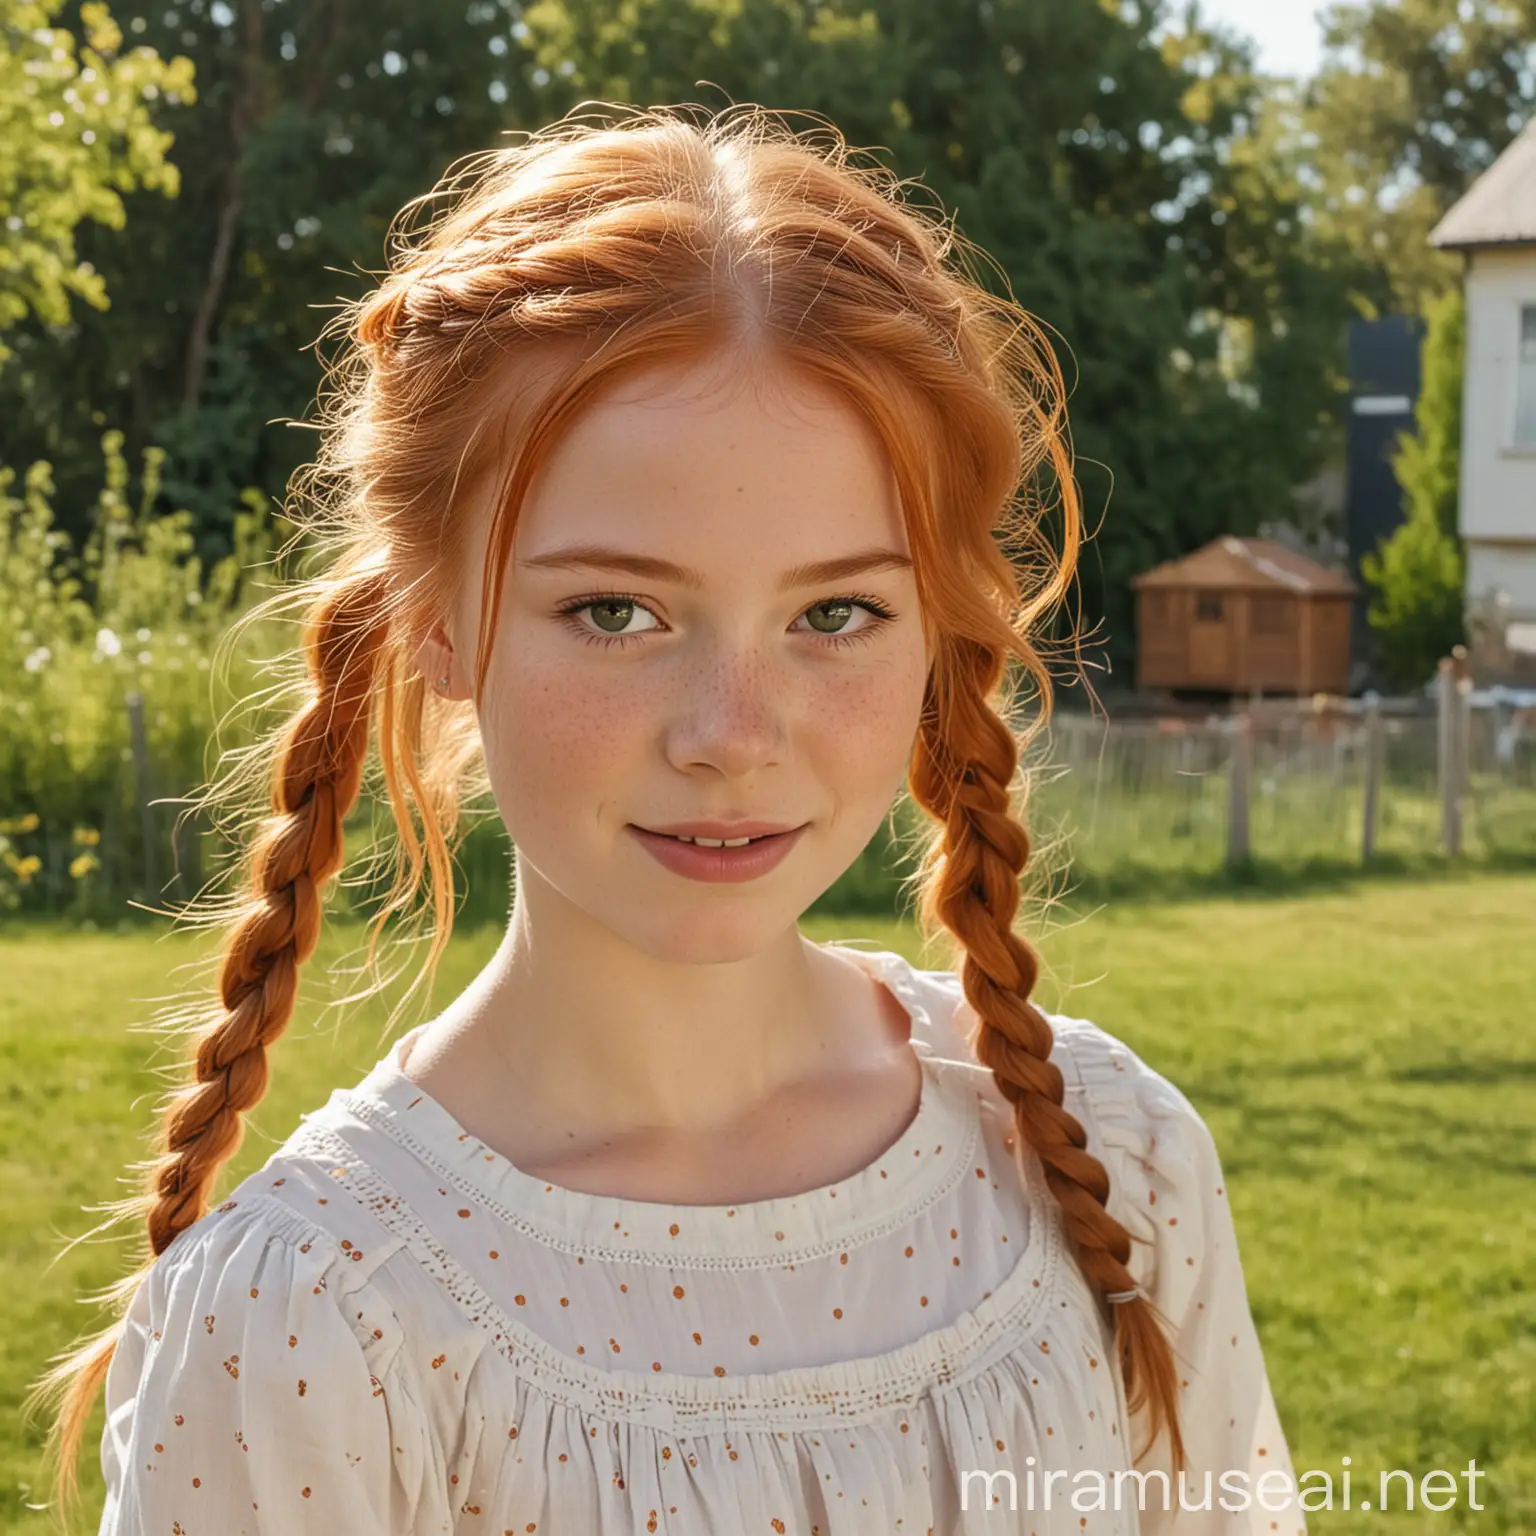 a young girl with ginger hair in braids childish constitution smaller build rosy cheeks with freckles, swinging in the backyard